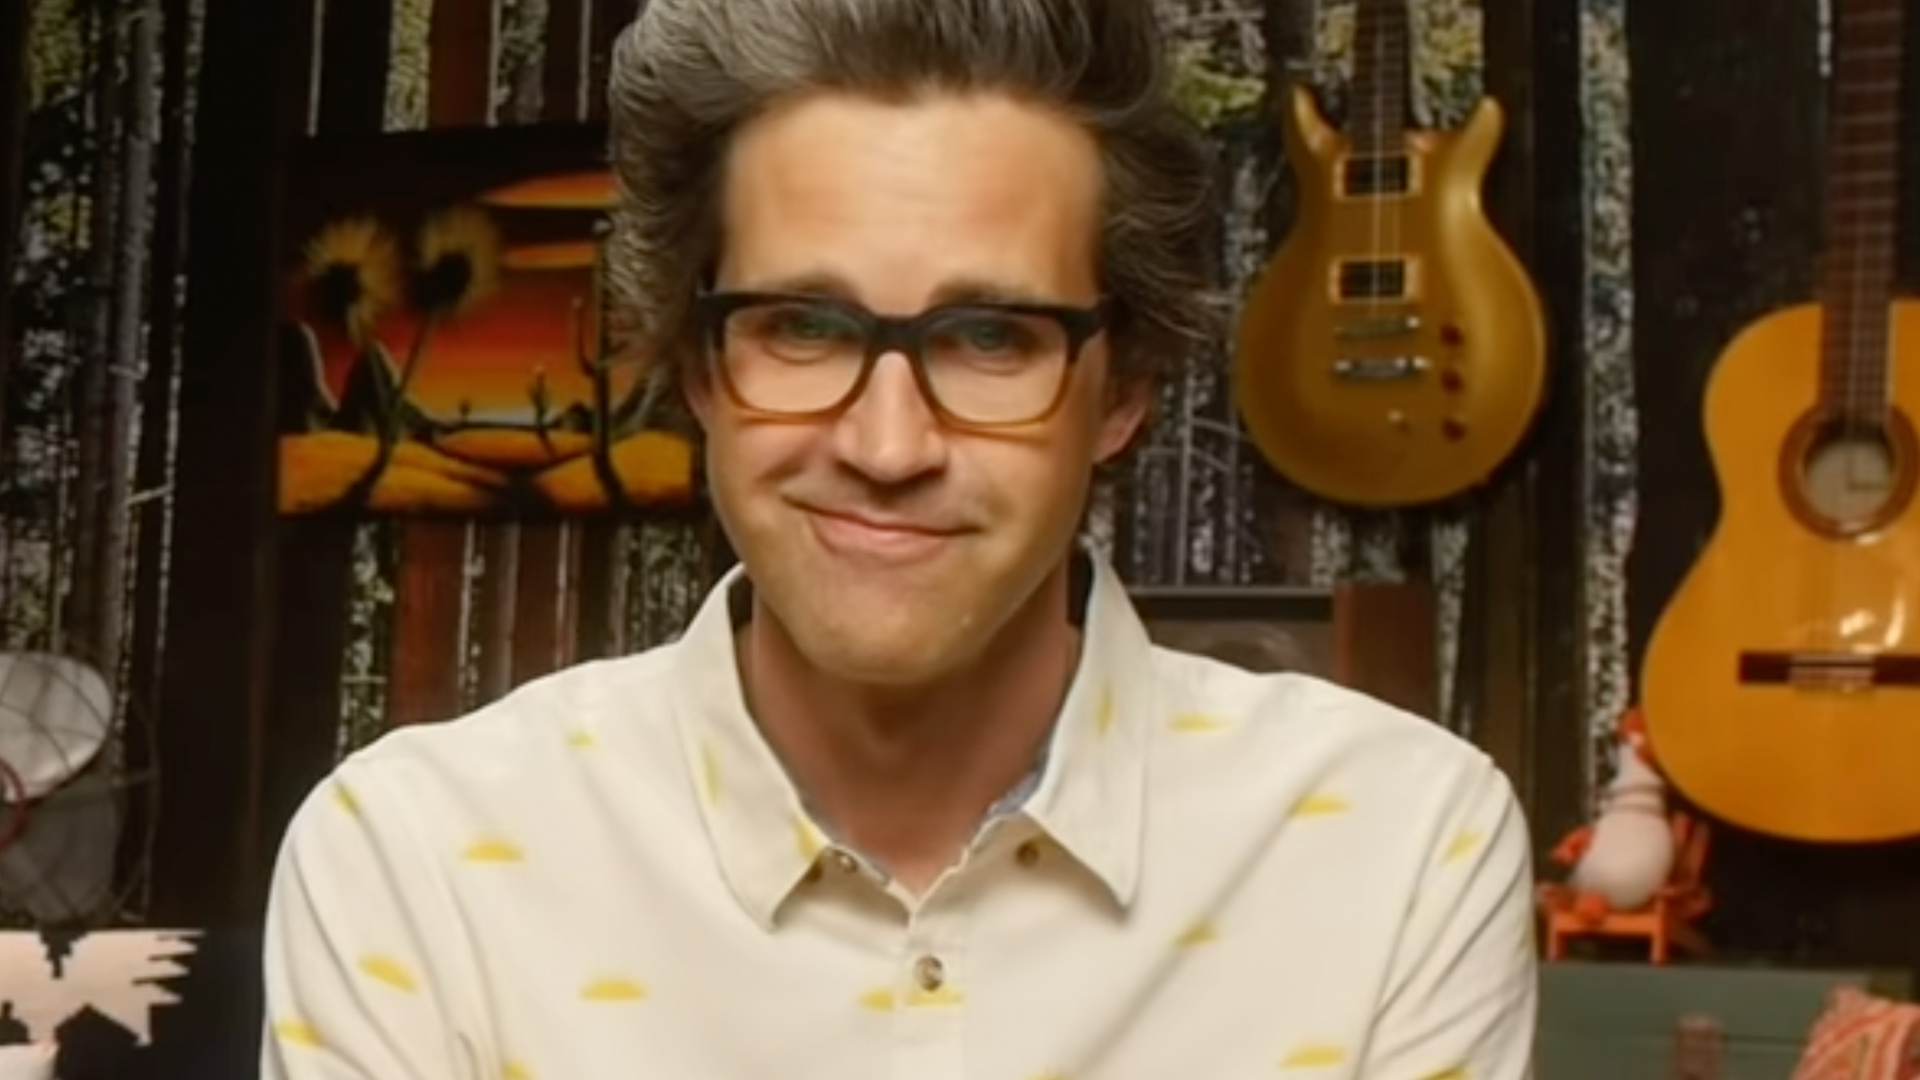 Link on Good Mythical Morning